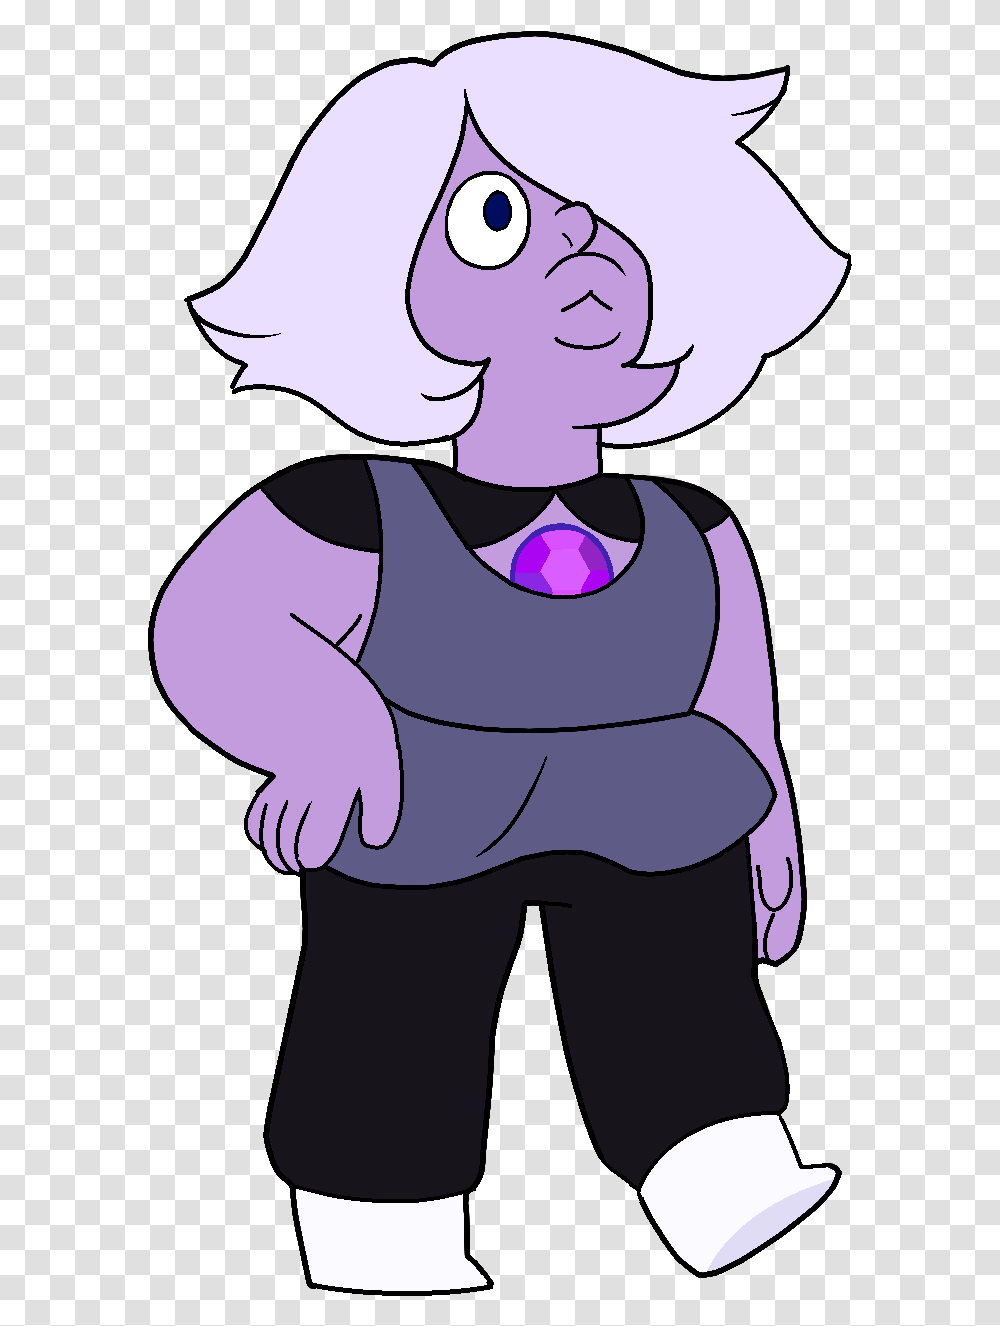 I Know Gem Babies Don't Exist But This Is Just So Cute Steven Universe Amethyst, Apparel Transparent Png